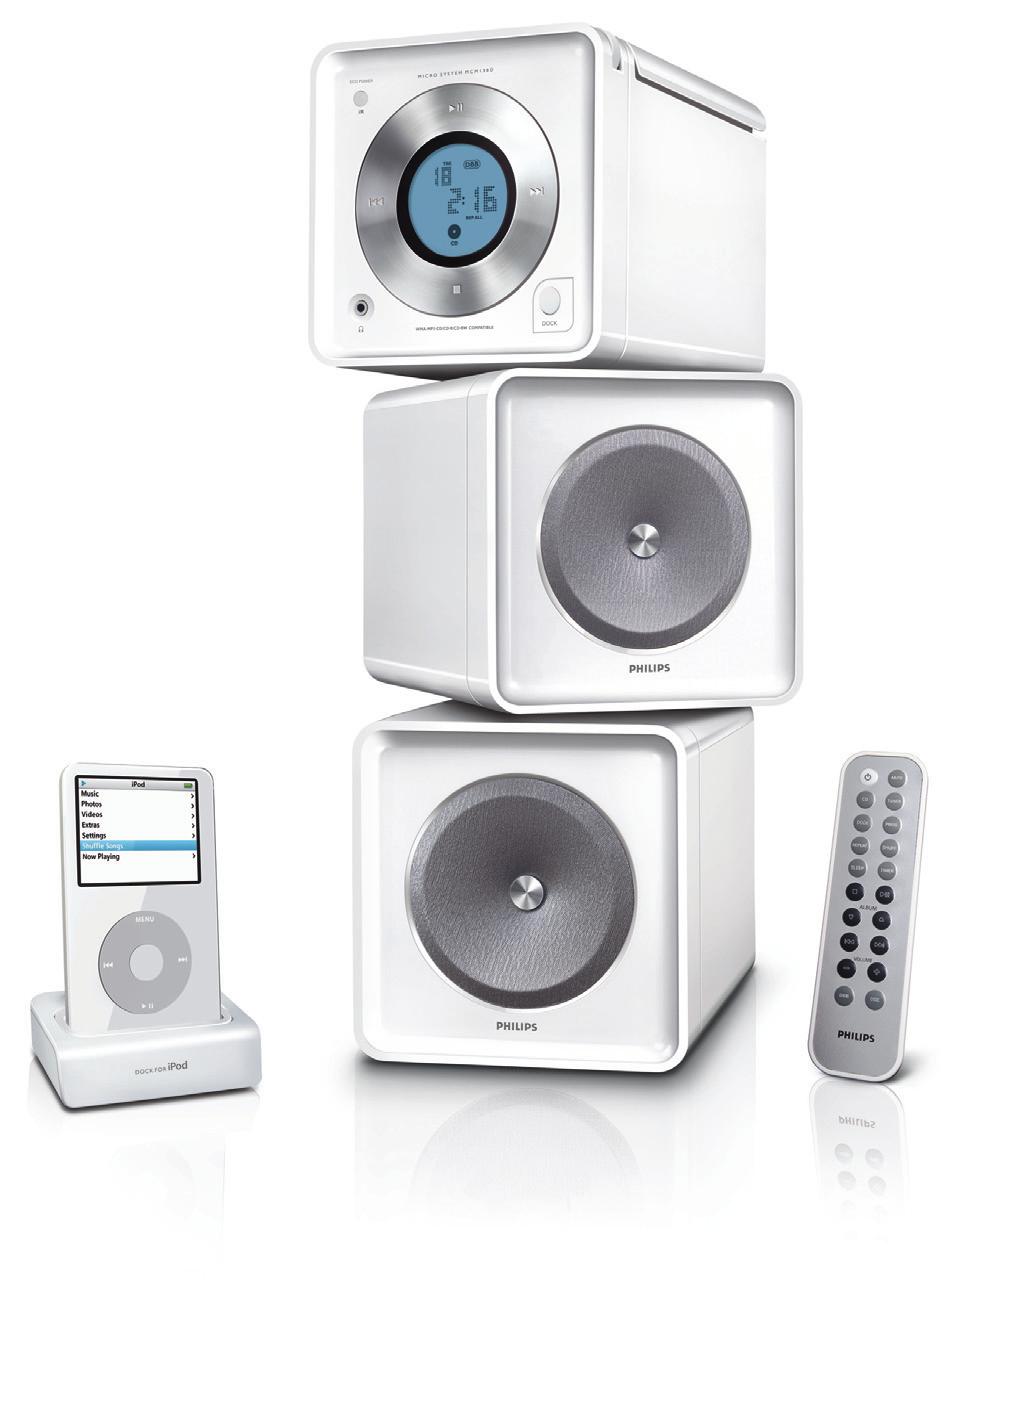 Docking Entertainment System MCM138D Register your product and get support at www.philips.